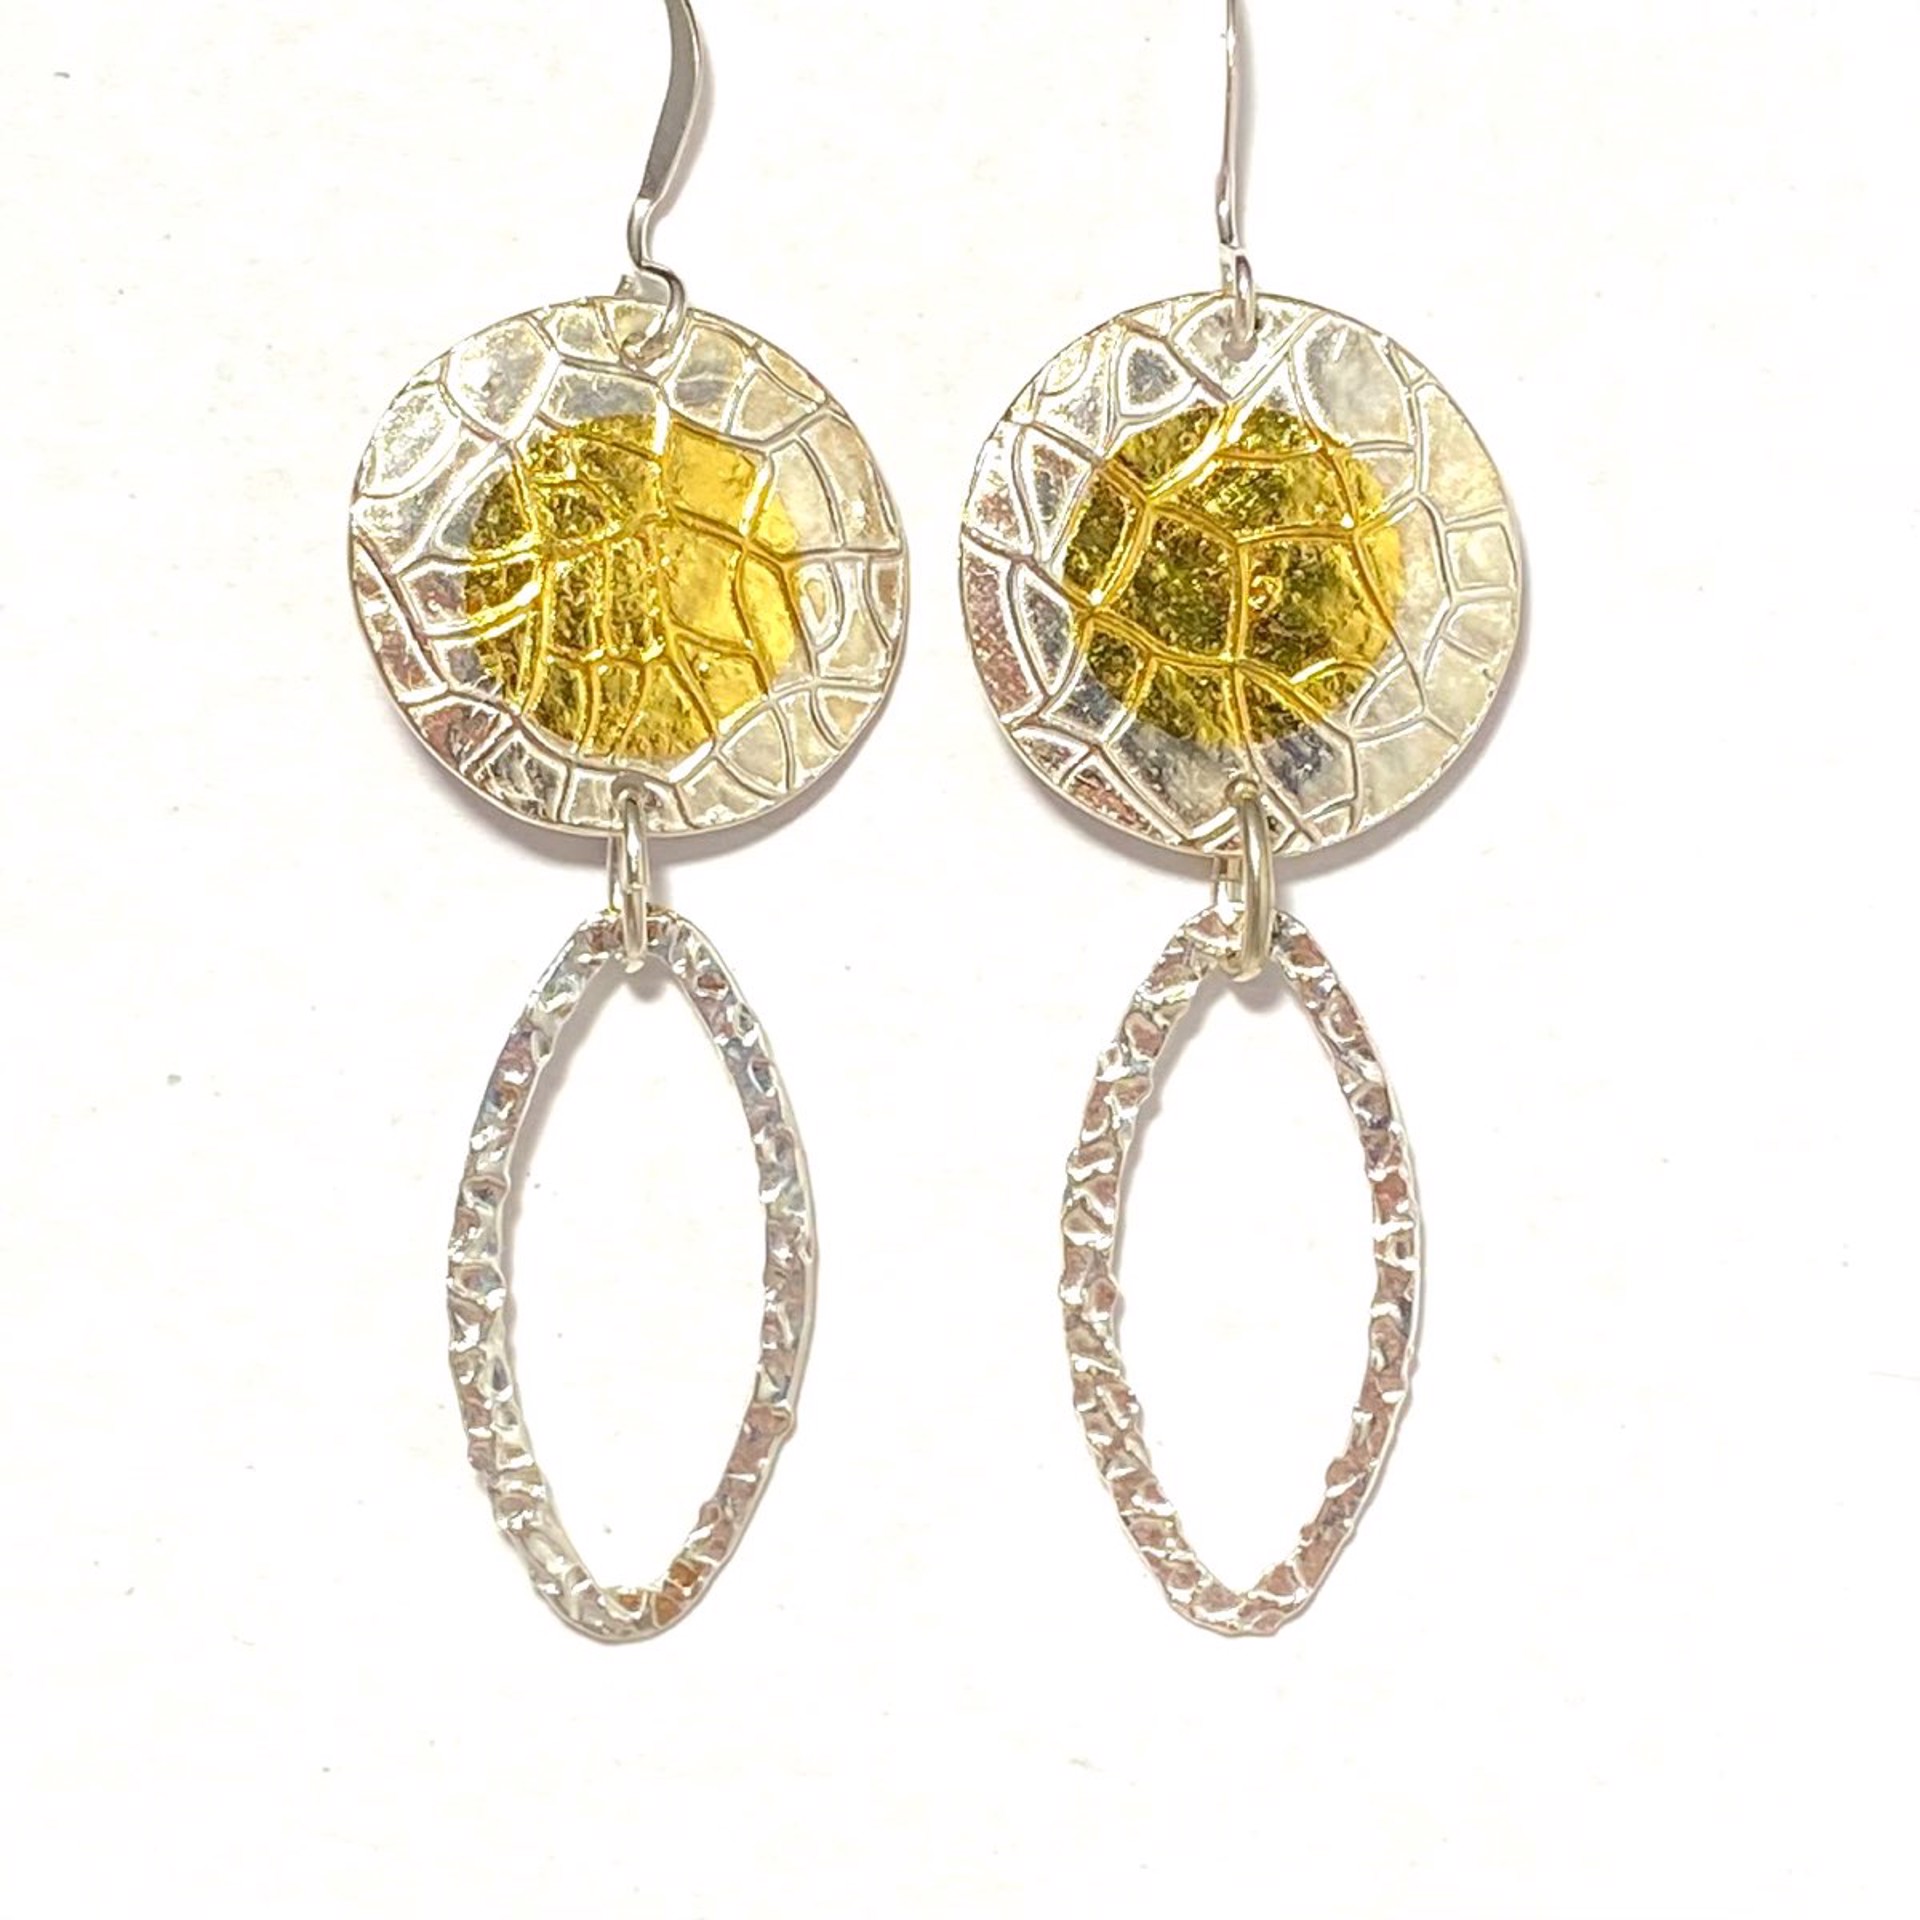 Keum-boo Fine Silver and Gold Circle Oval Dangle Earrings by Karen Hakim